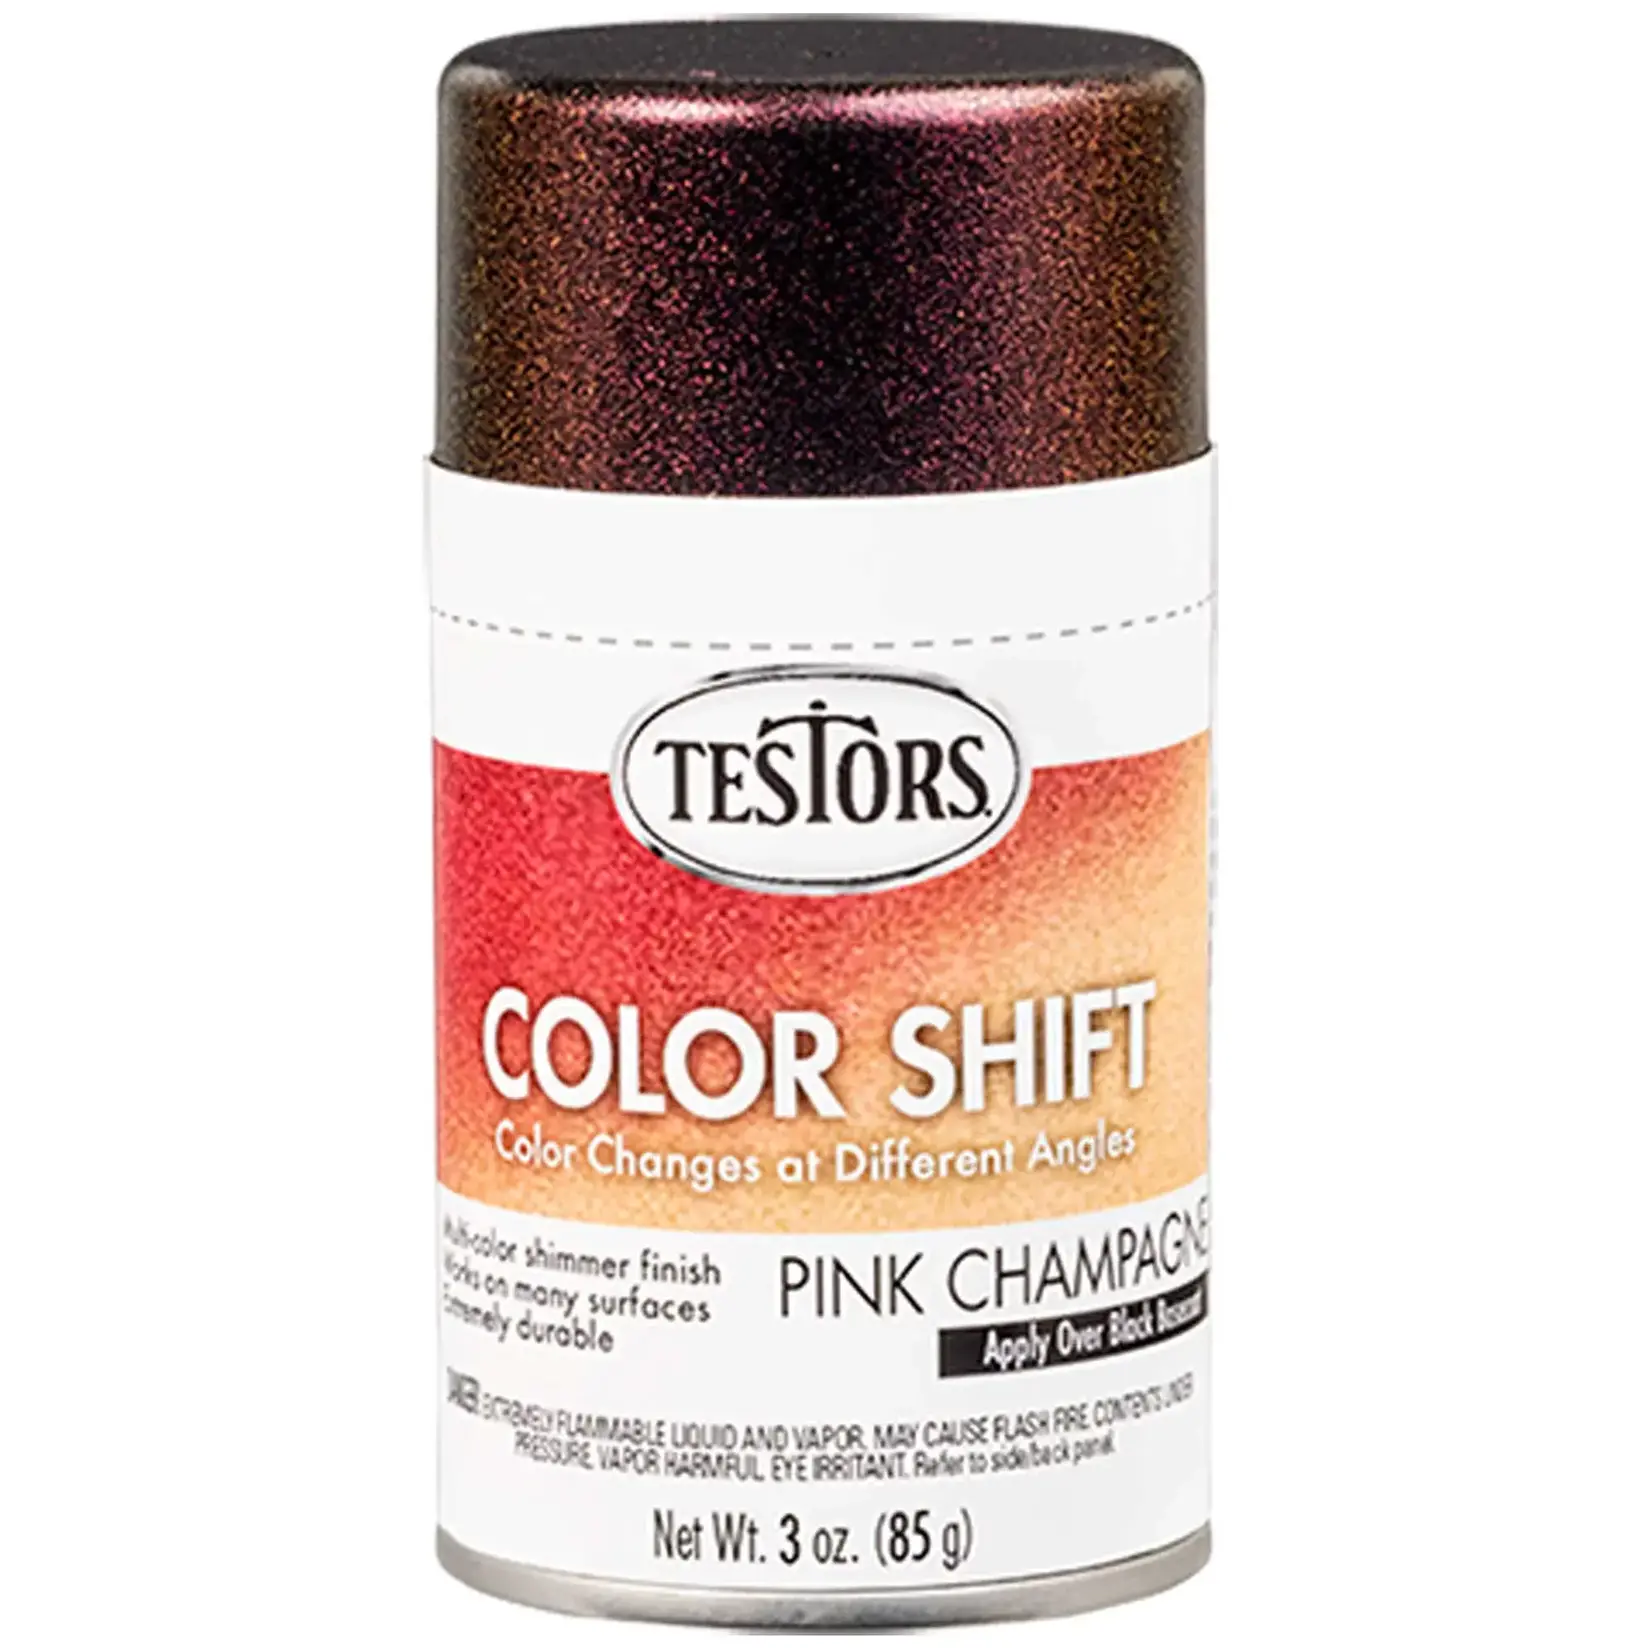 TESTORS 352457 PINK CHAMPAGNE COLOR SHIFT SPRAY PAINT 3 OZ. CAN